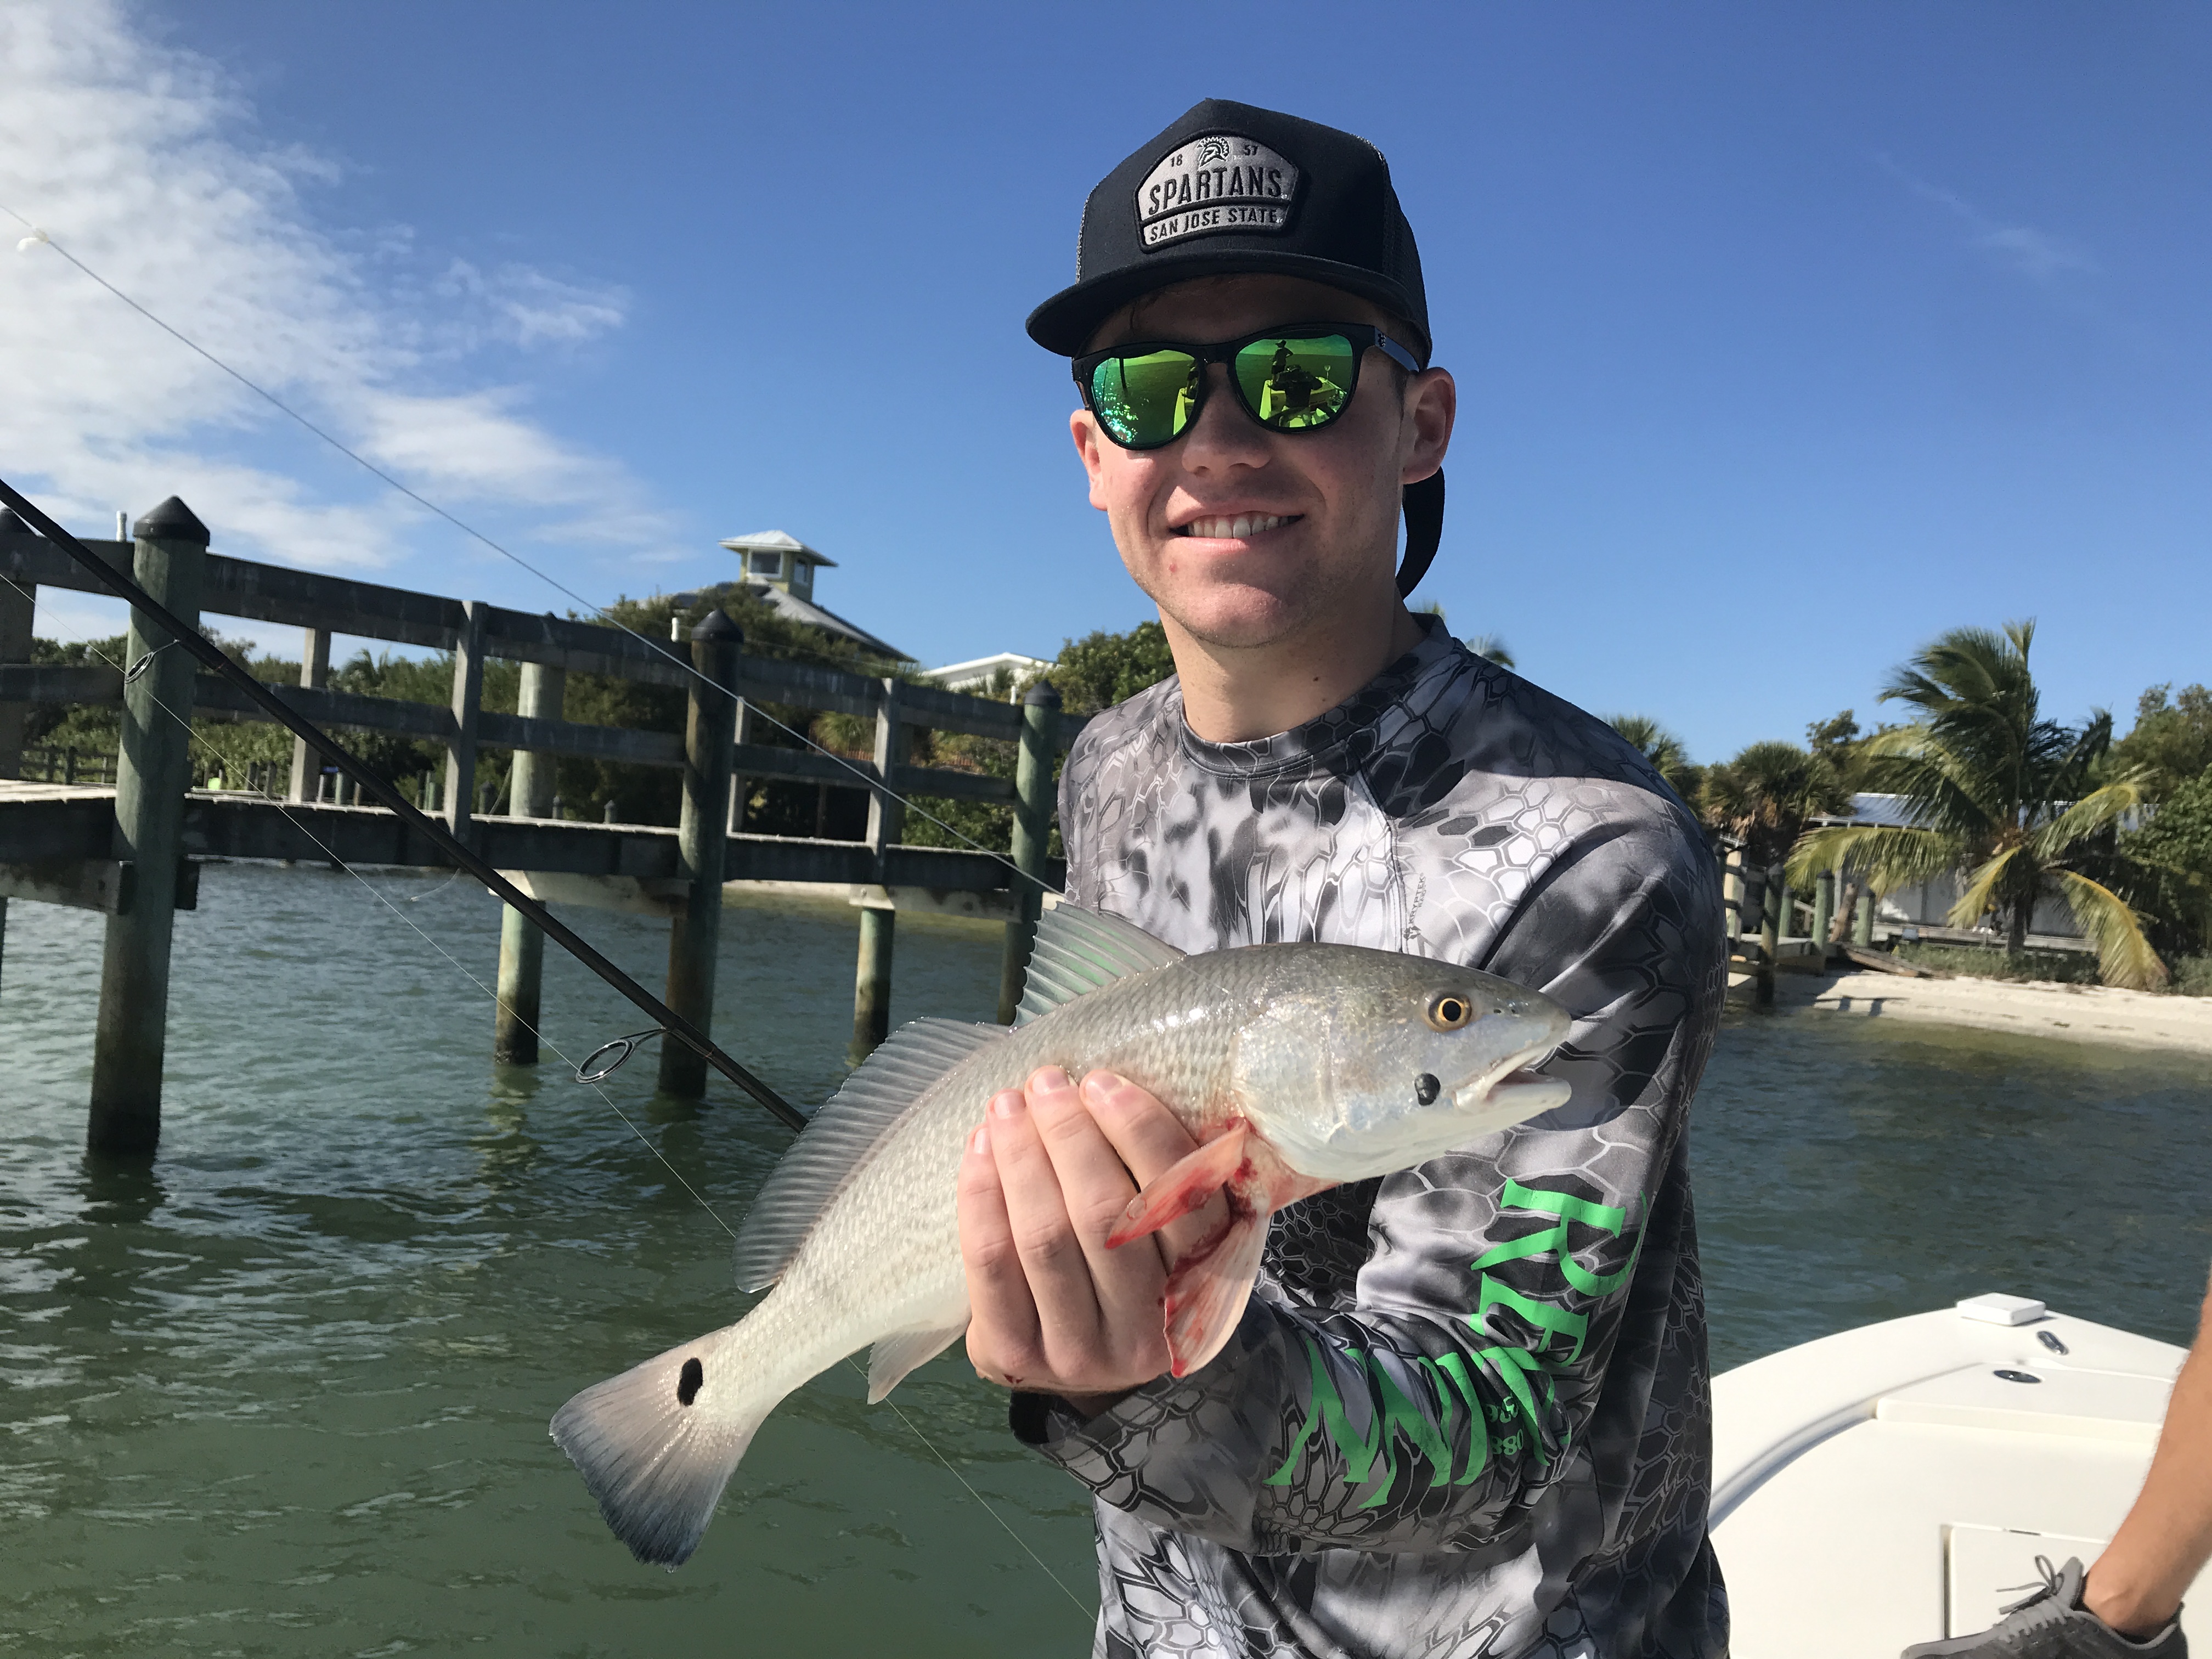 Josh pictured with his Redfish